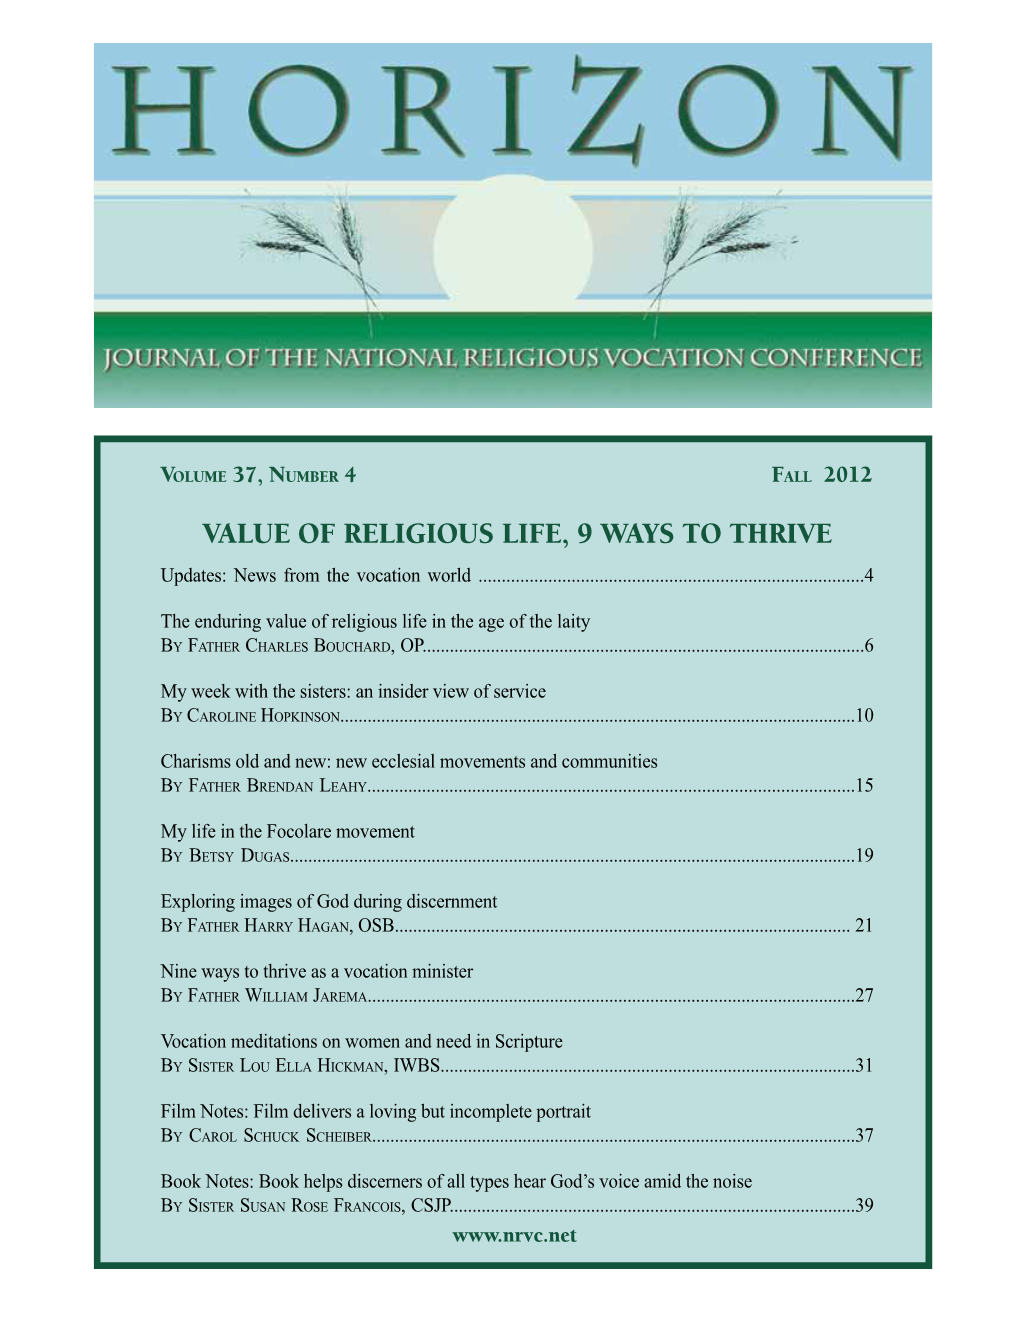 Value of Religious Life, 9 Ways to Thrive Updates: News from the Vocation World